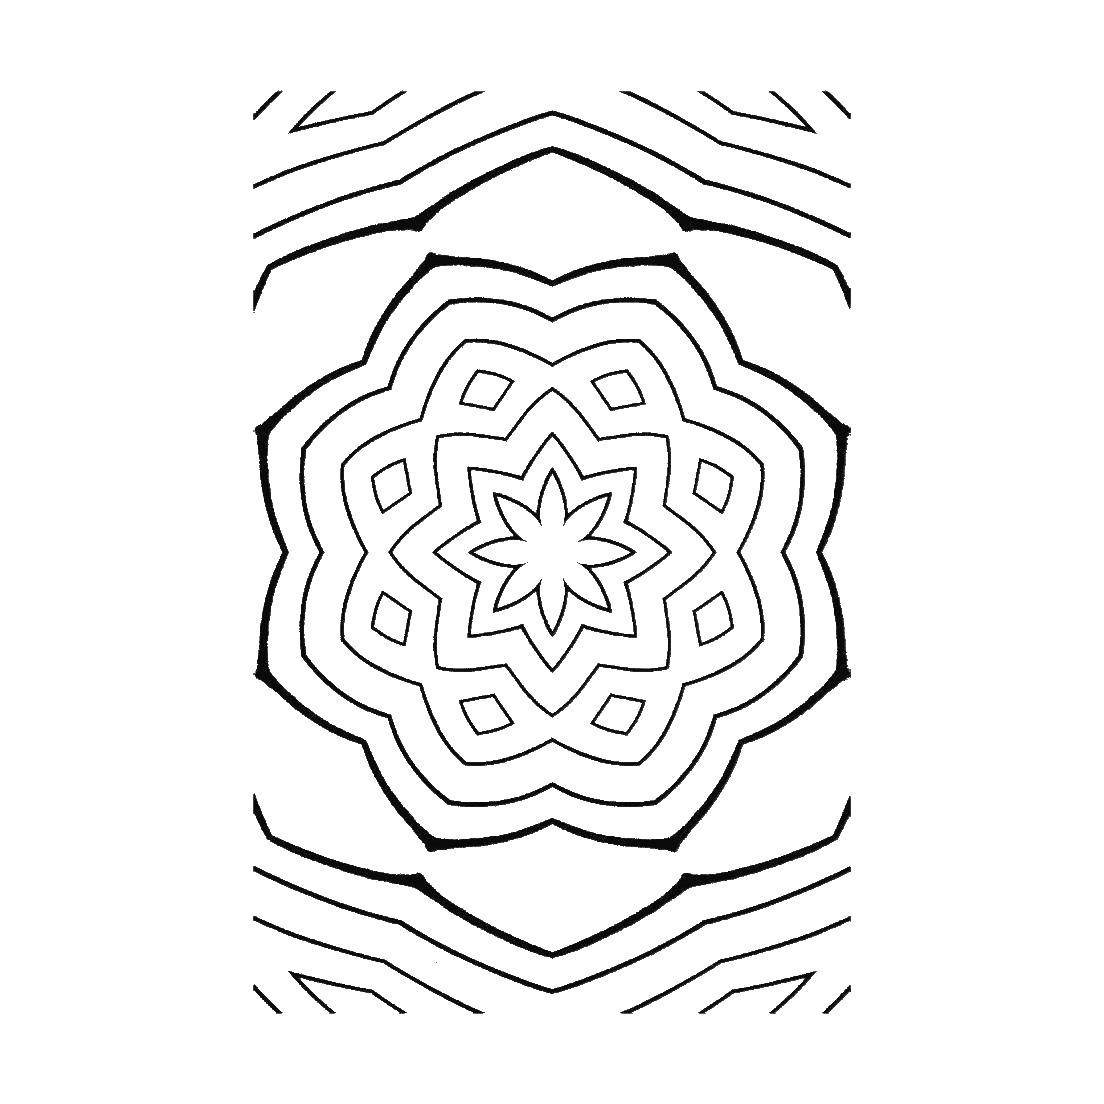 Coloring Patterned flower. Category pattern . Tags:  Patterns, flower.